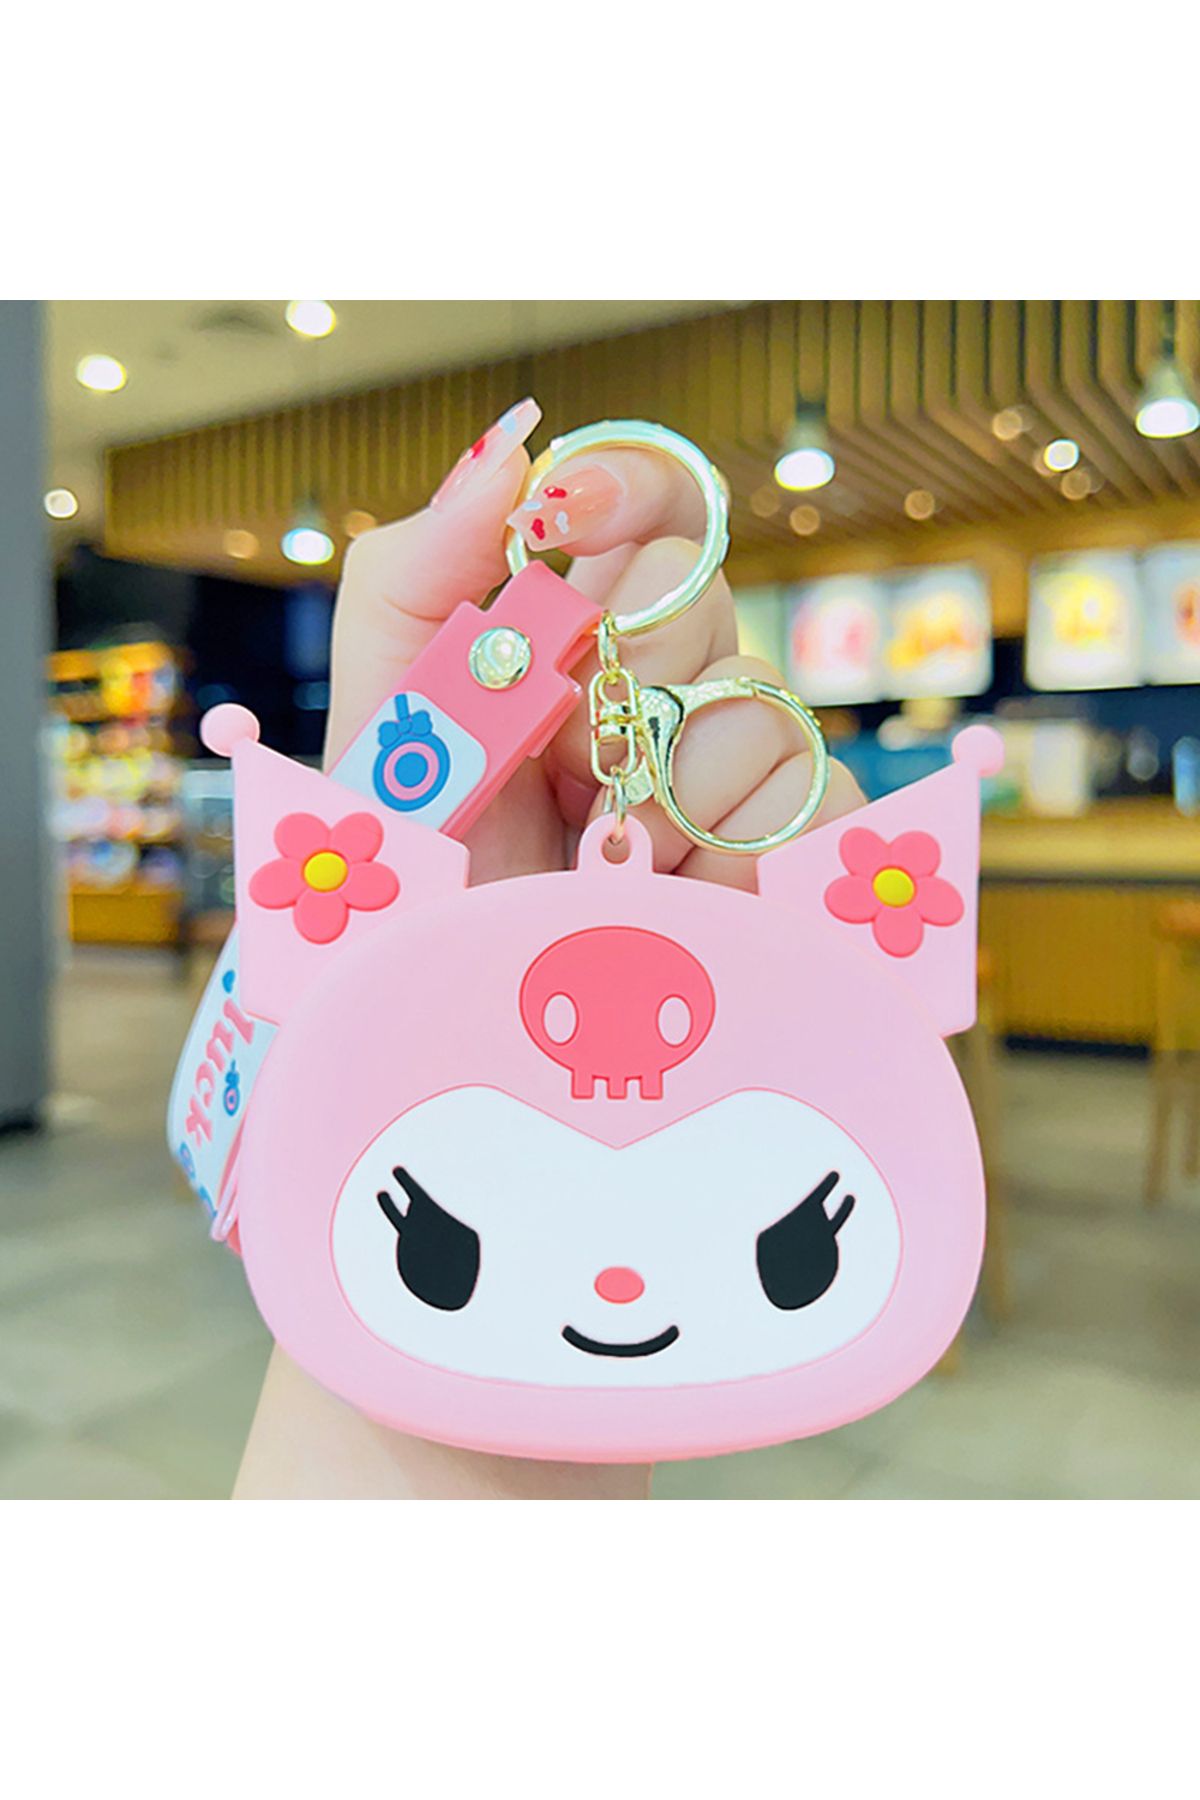 Buy 4.53 Cute Wallet, Christmas Gift,kawaii Coin Purse,mini Key Pouch,birthday  Gift for Her,anime Wallet,cute Anime Design, Ready to Ship Online in India  - Etsy